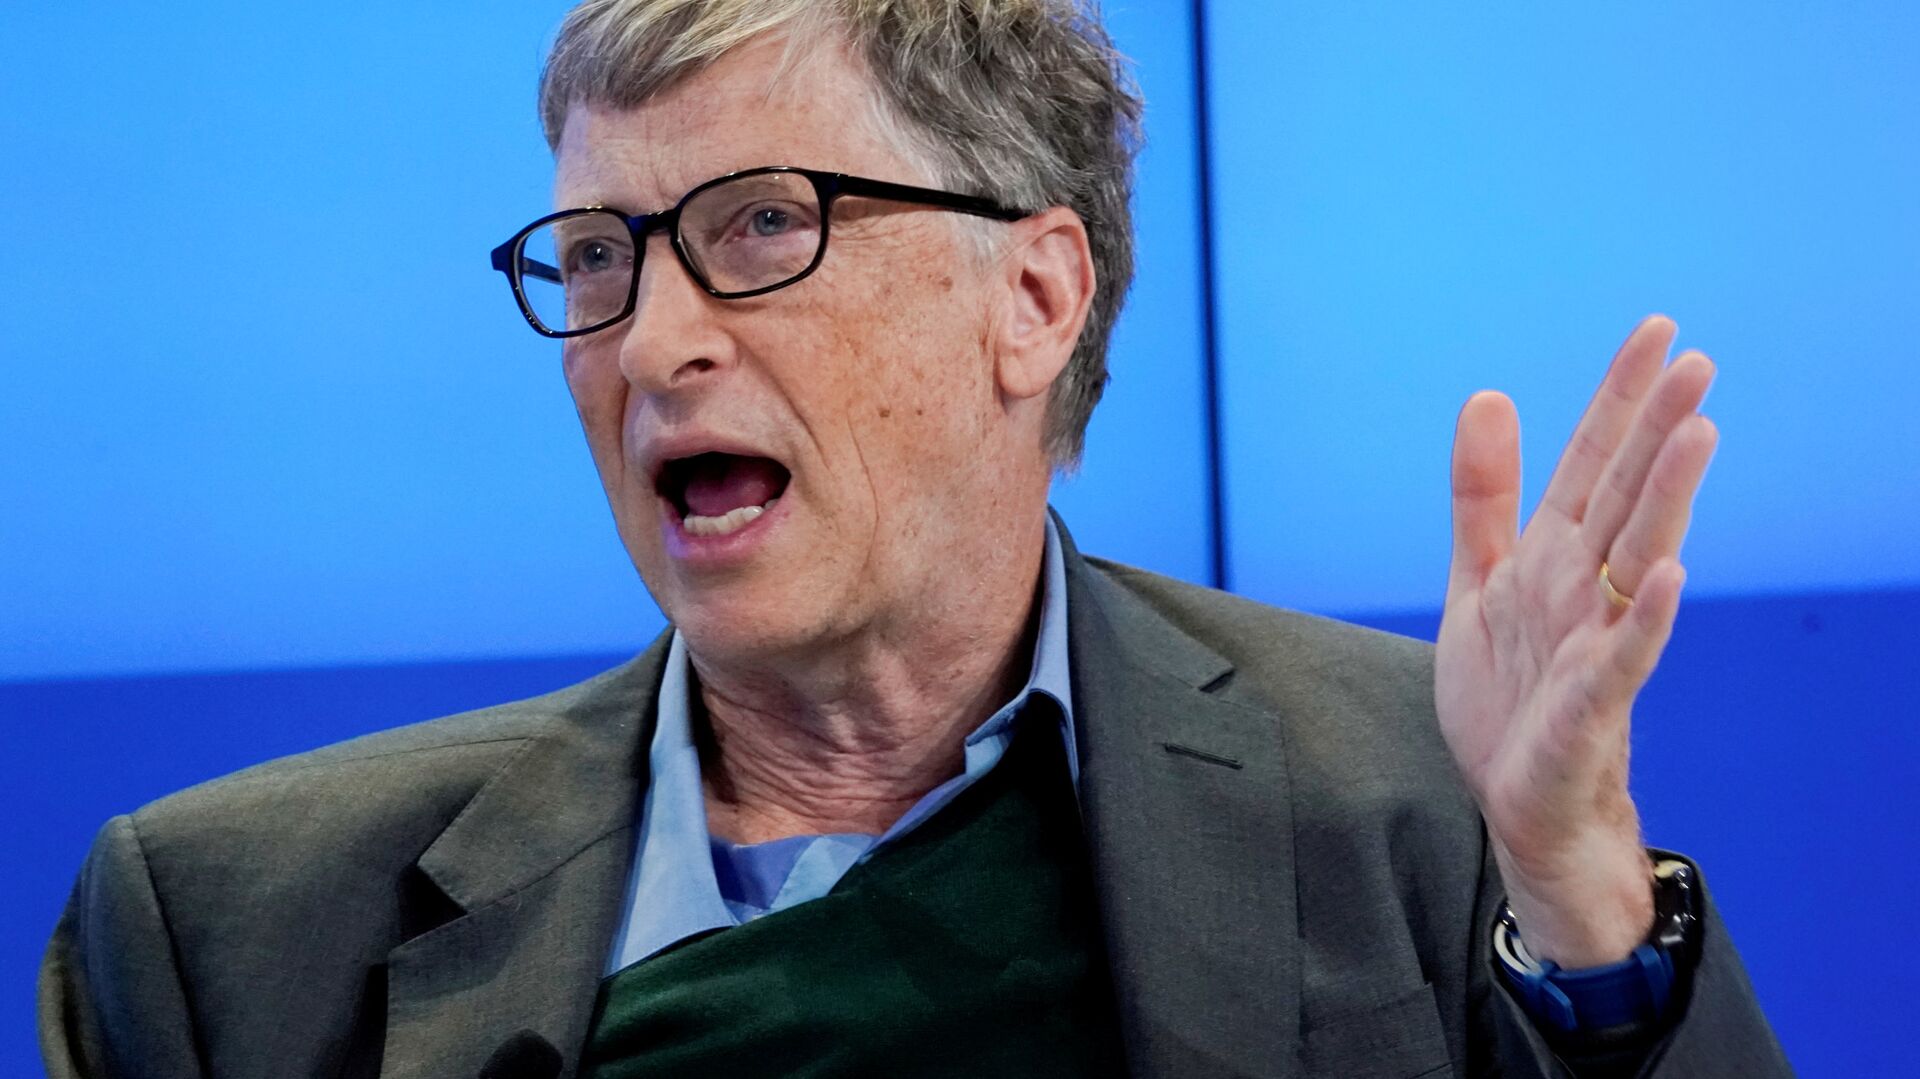  Bill Gates, Co-Chair of Bill & Melinda Gates Foundation, gestures as he speaks during the World Economic Forum (WEF) annual meeting in Davos, Switzerland January 25, 2018 - Sputnik International, 1920, 28.04.2021